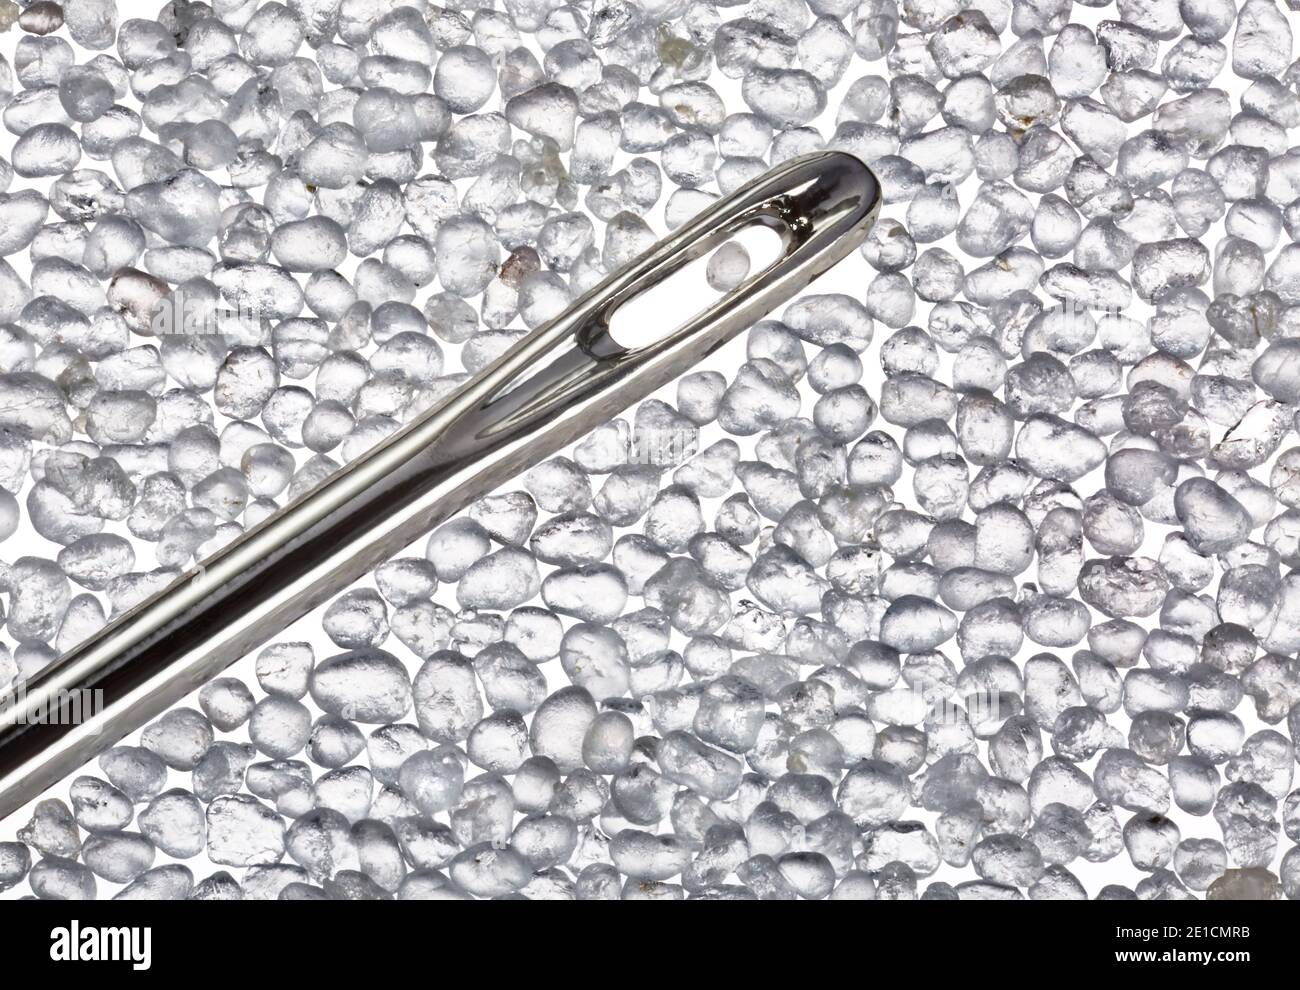 Sand in the eye of a needle magnified at 5x magnification photographed on a white background Stock Photo